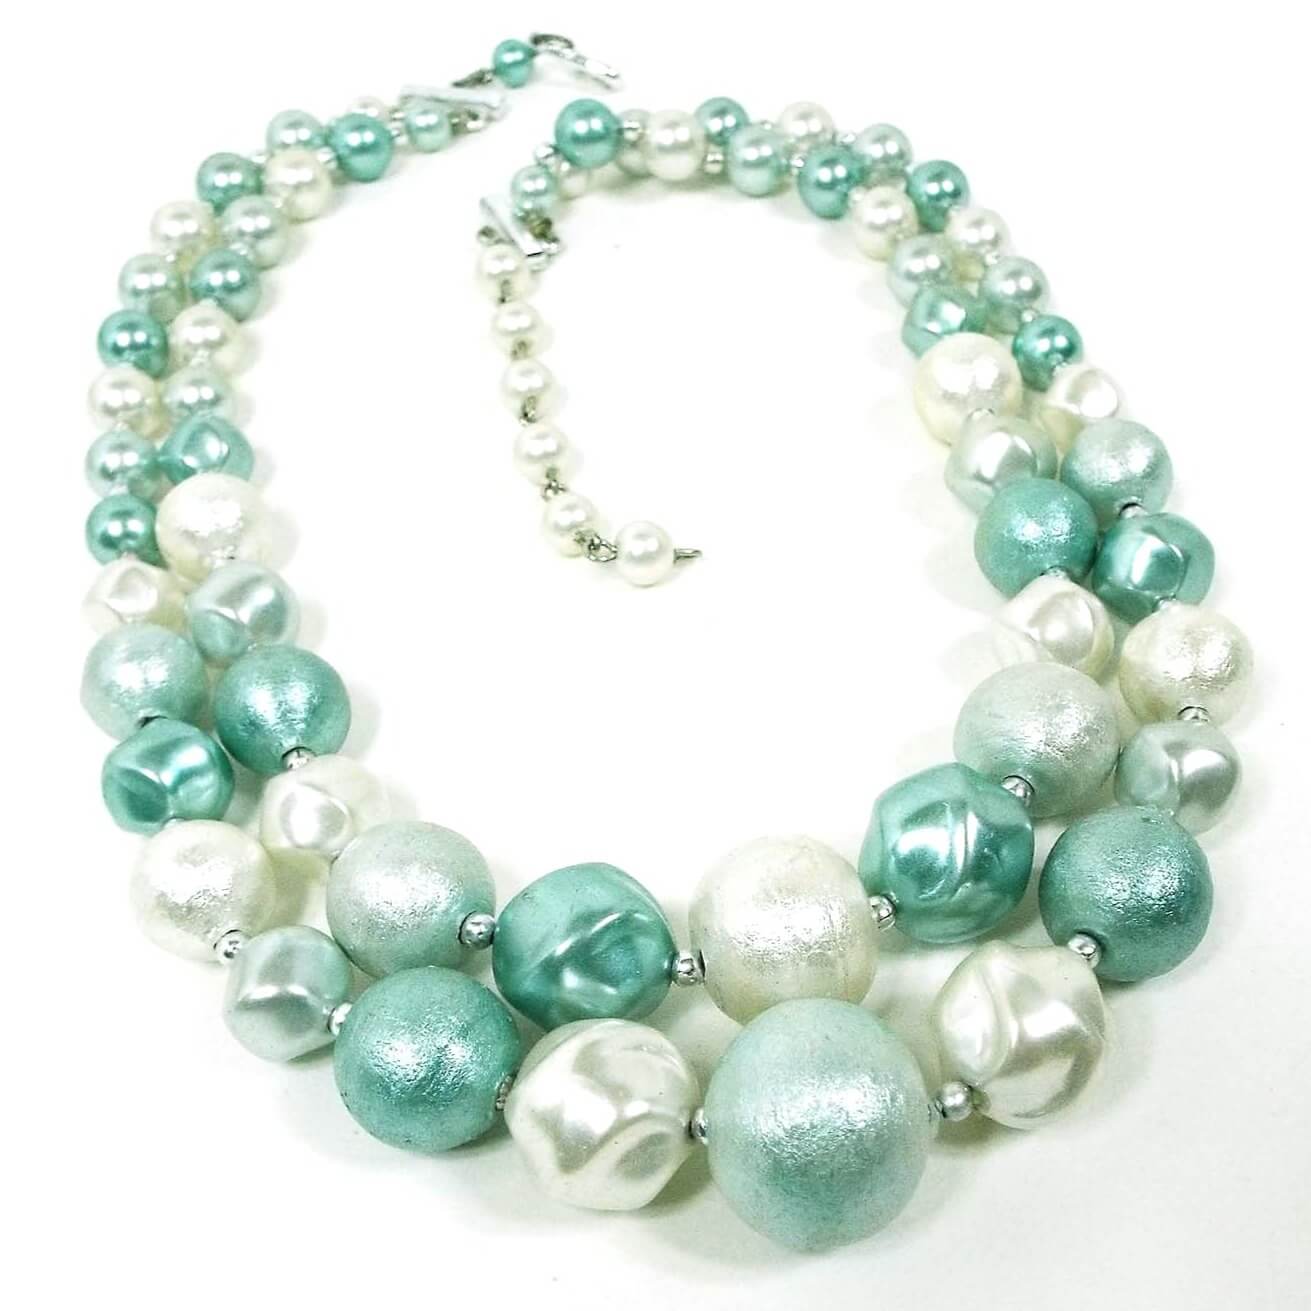 Japan Mid Century vintage multi strand beaded necklace. There are two strands of textured round and chunky styled plastic beads. The beads are mostly mint green and white in color. There is a hook clasp at the end.